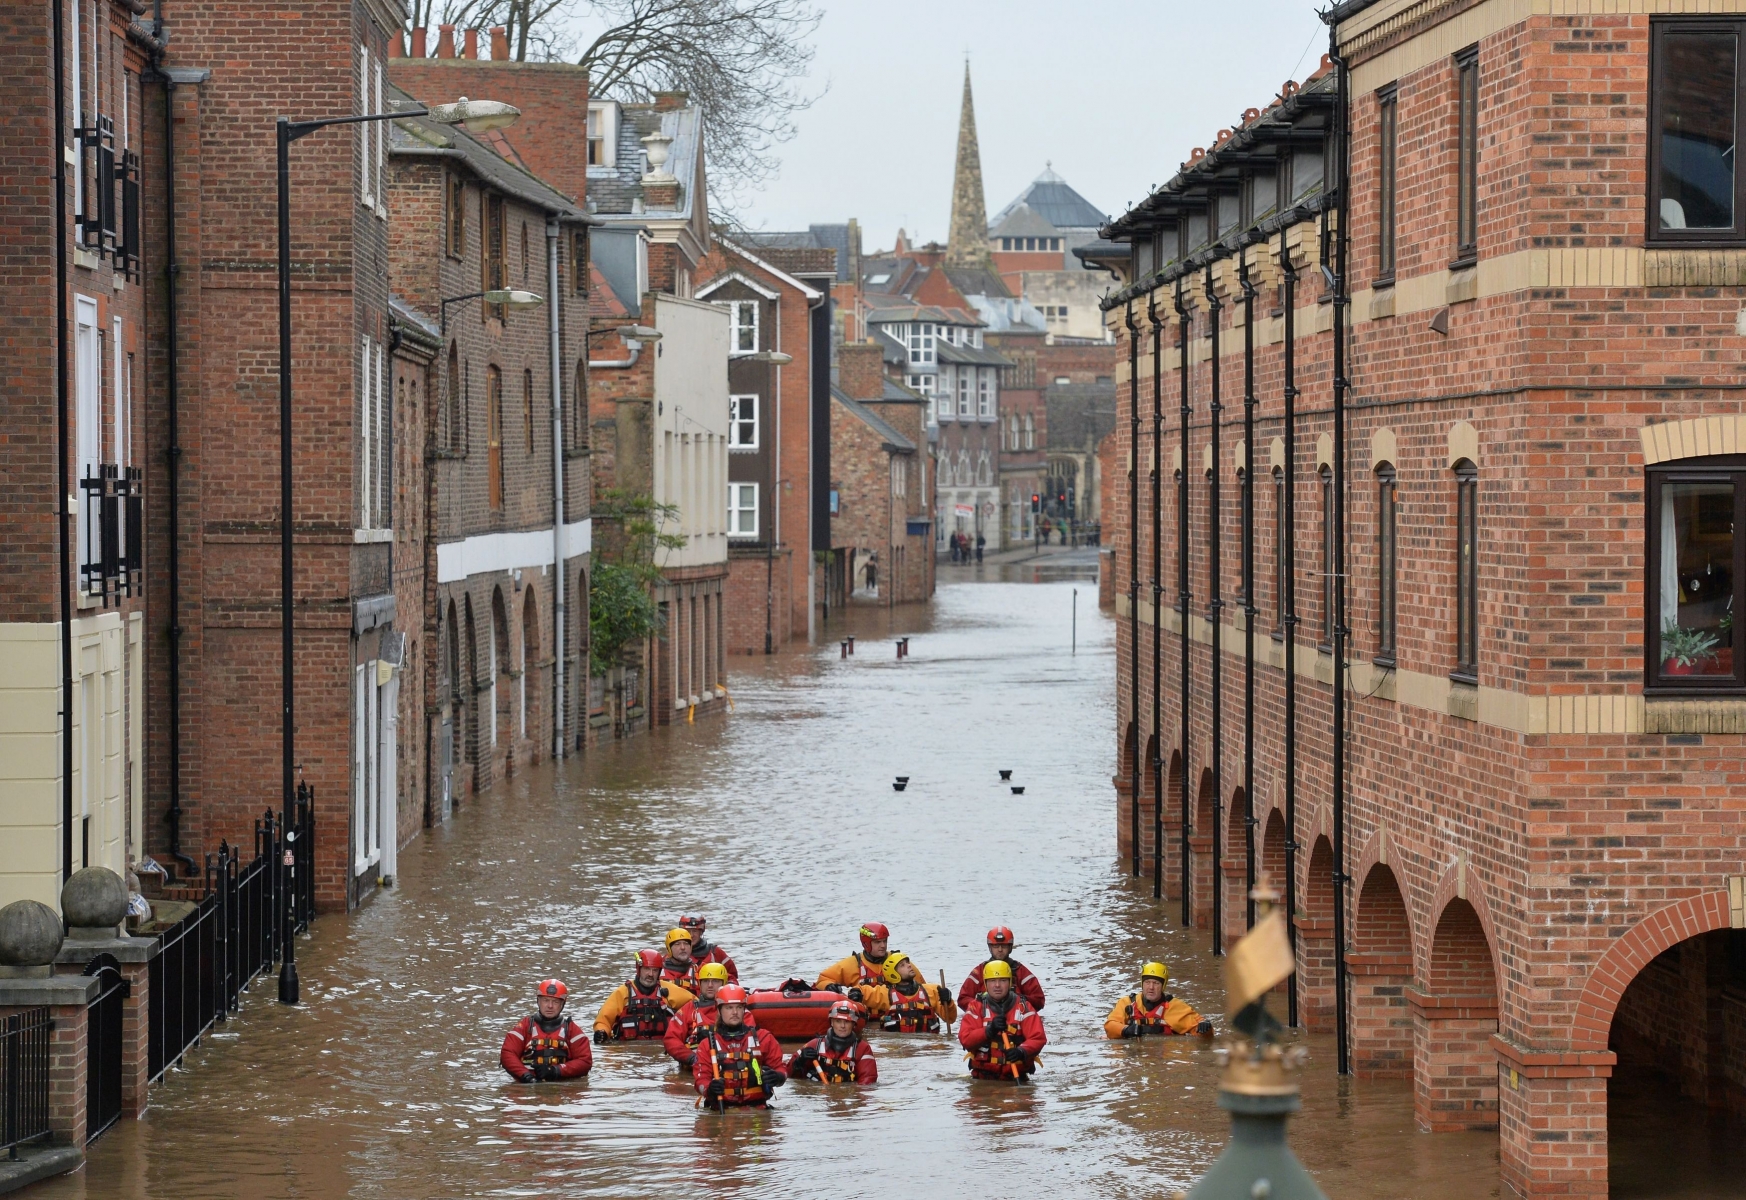 Members of the Mountain Rescue team wade through floodwater in Skeldergate, York. England, Monday, Dec. 28, 2015. British Prime Minister David Cameron sent hundreds more troops into northern England on Sunday to help exhausted residents and emergency workers fight back rising river waters that have inundated towns and cities after weeks of heavy rain. (Anna Gowthorpe/PA via AP) UNITED KINGDOM OUT NO SALES NO ARCHIVE Britain Floods